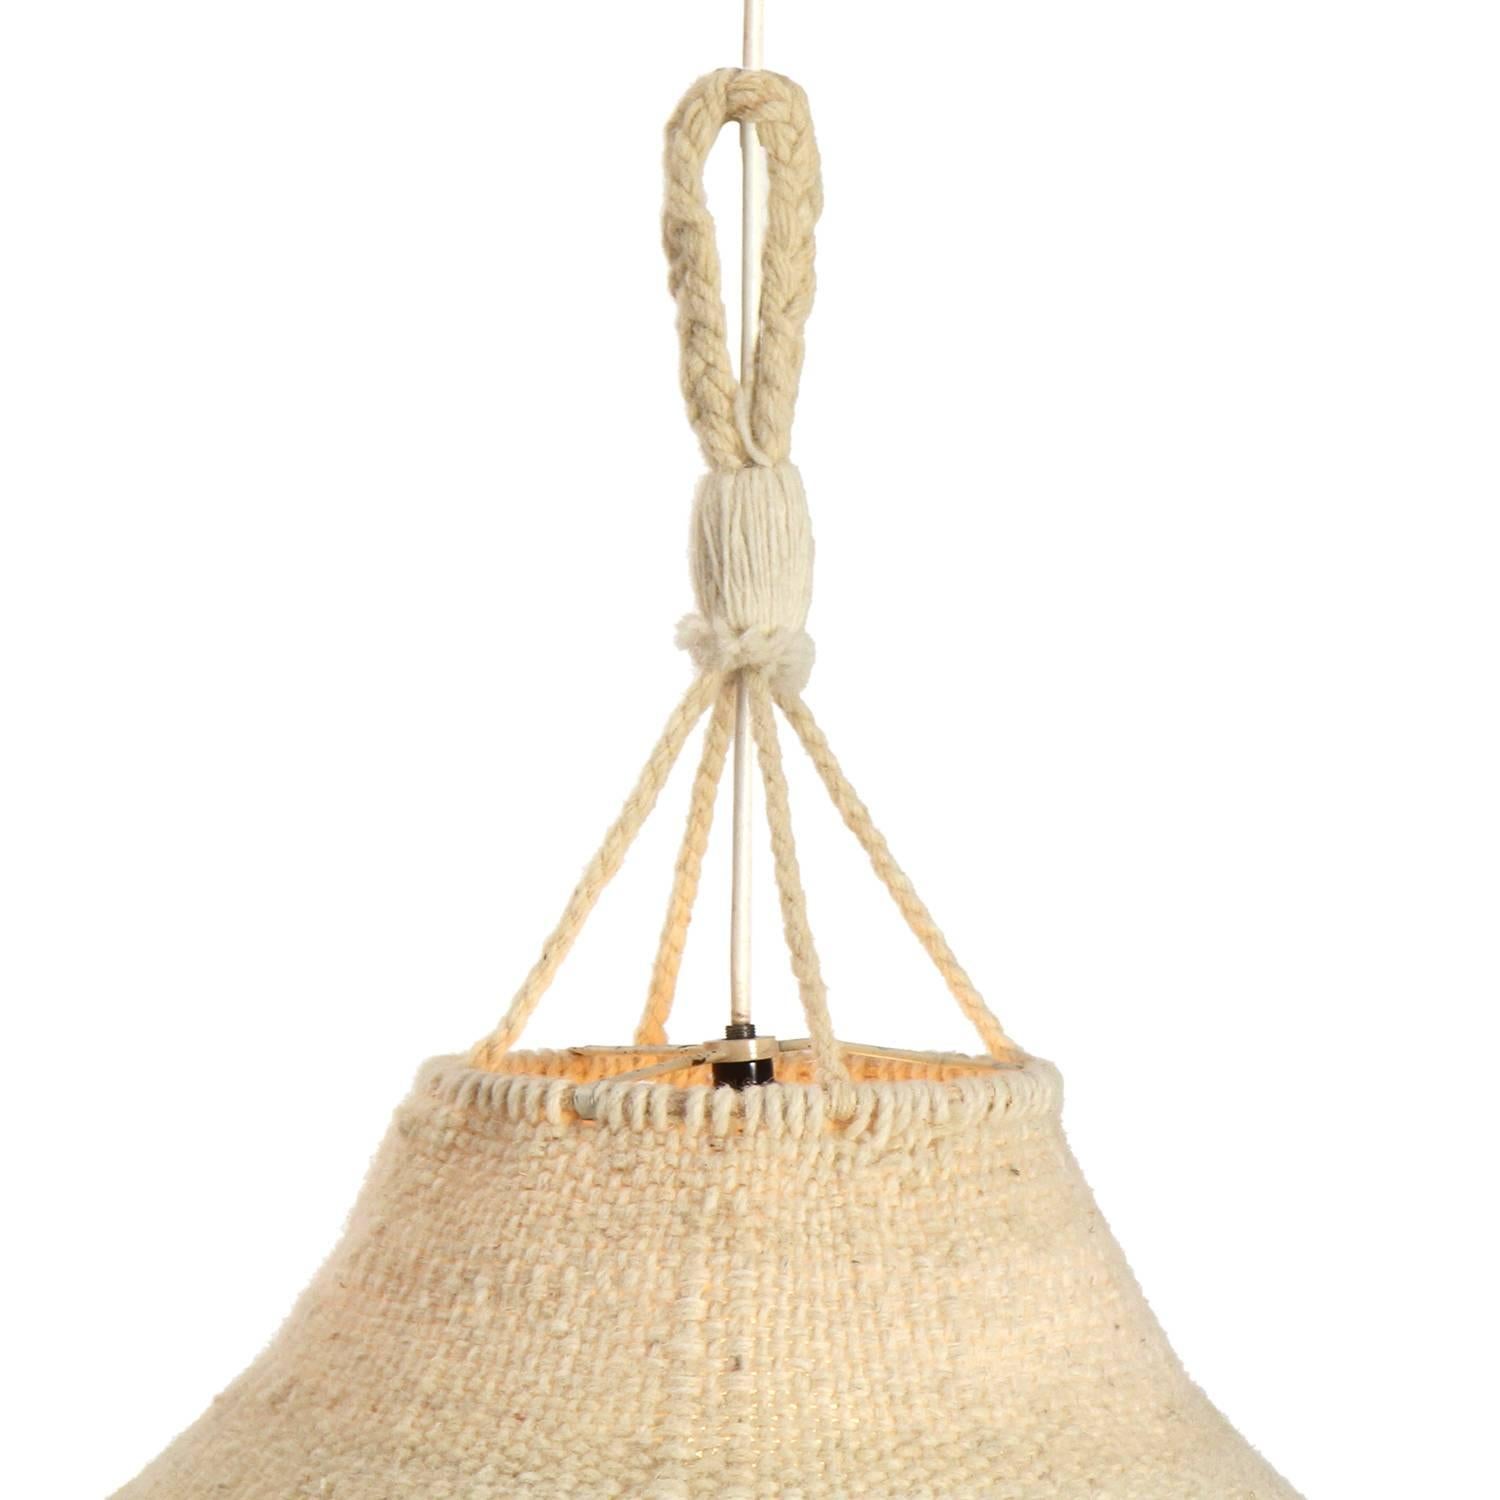 A unique and expressive artist-made handwoven and braided natural fiber hanging lamp having a tall columnar form.